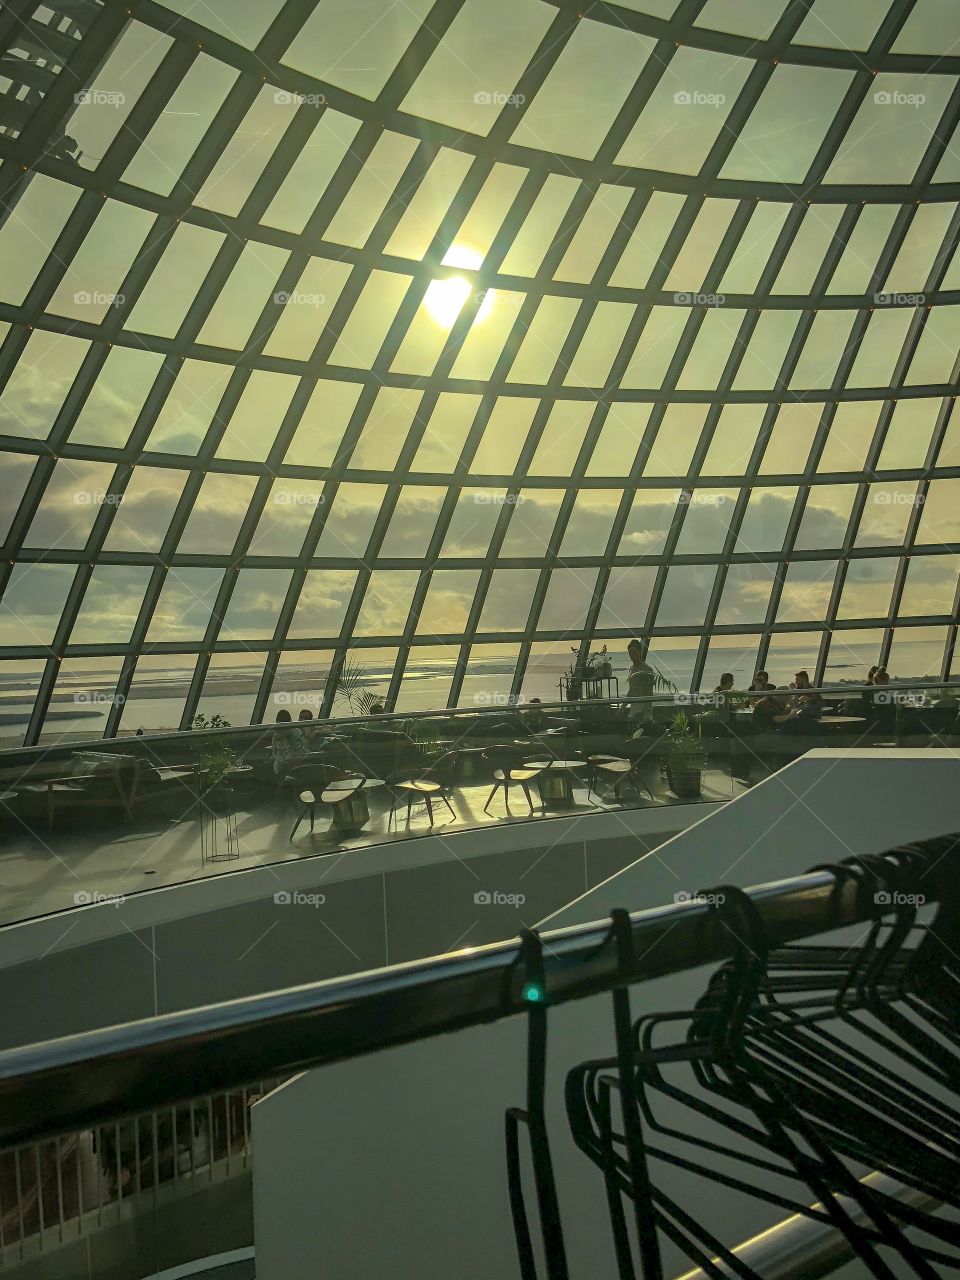 Inside Perlan in Iceland.  A fantastic place with a glacier simulation and panoramic views over the city of REYKJAVIK, ICELAND.